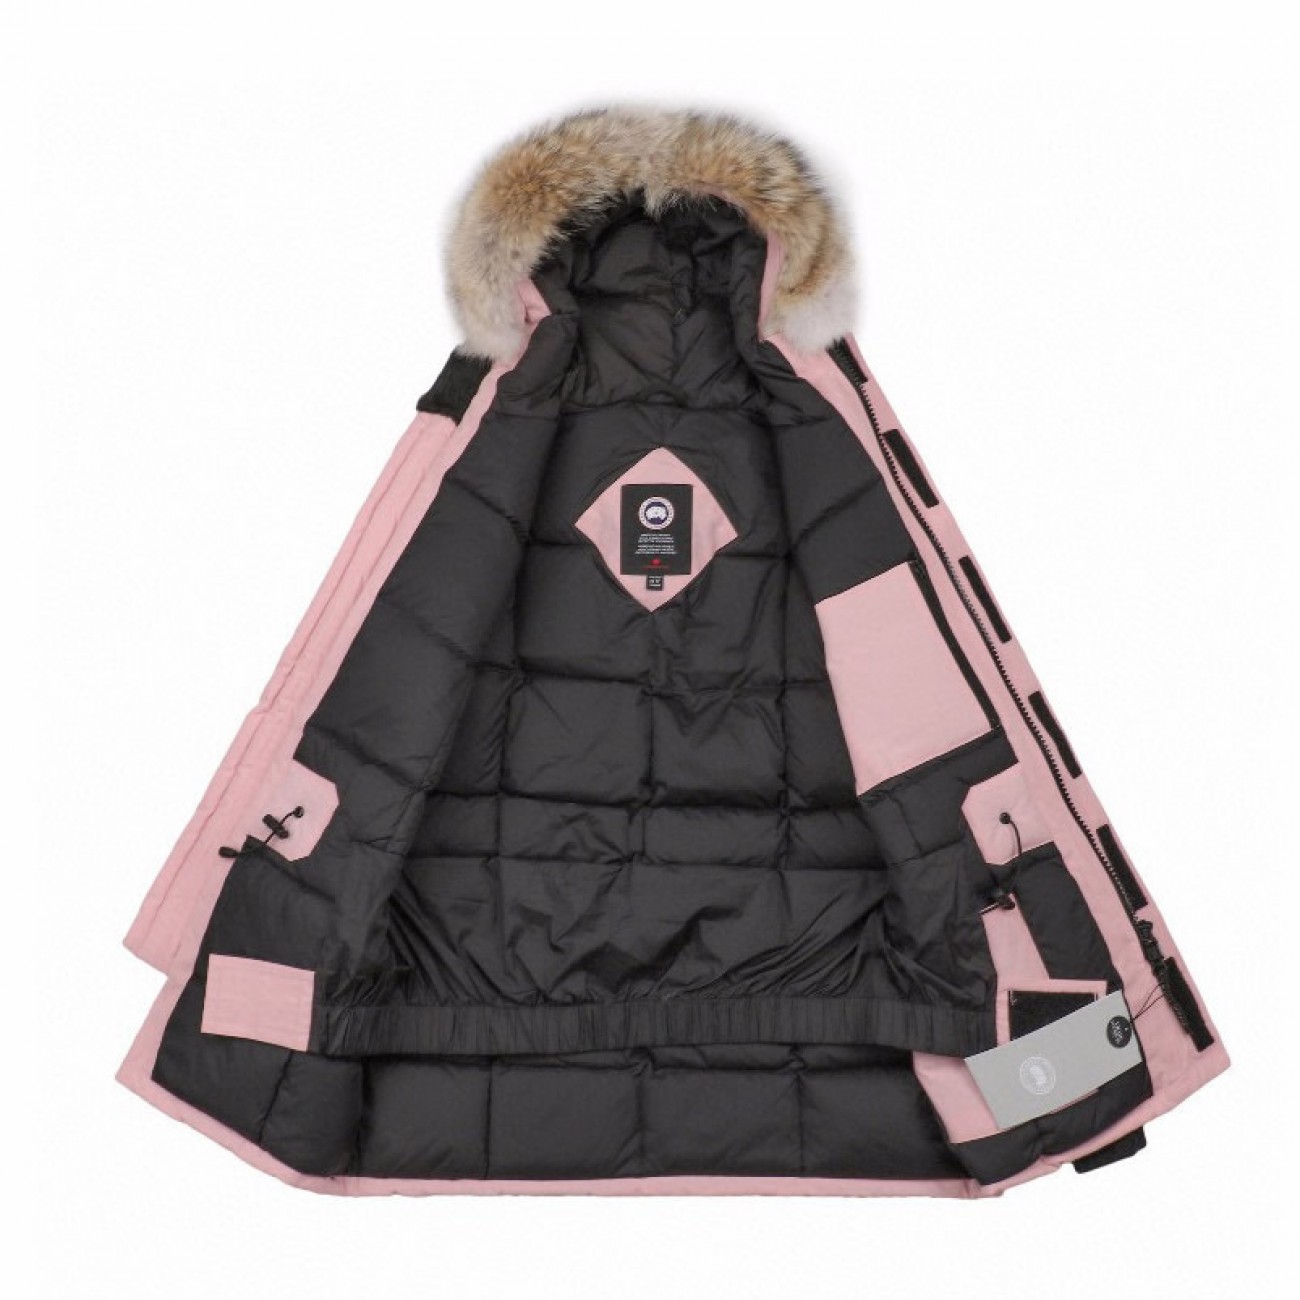 08 ' Canada Goose '19FW Expedition 4660MA Down Jacket Coat "Pink"